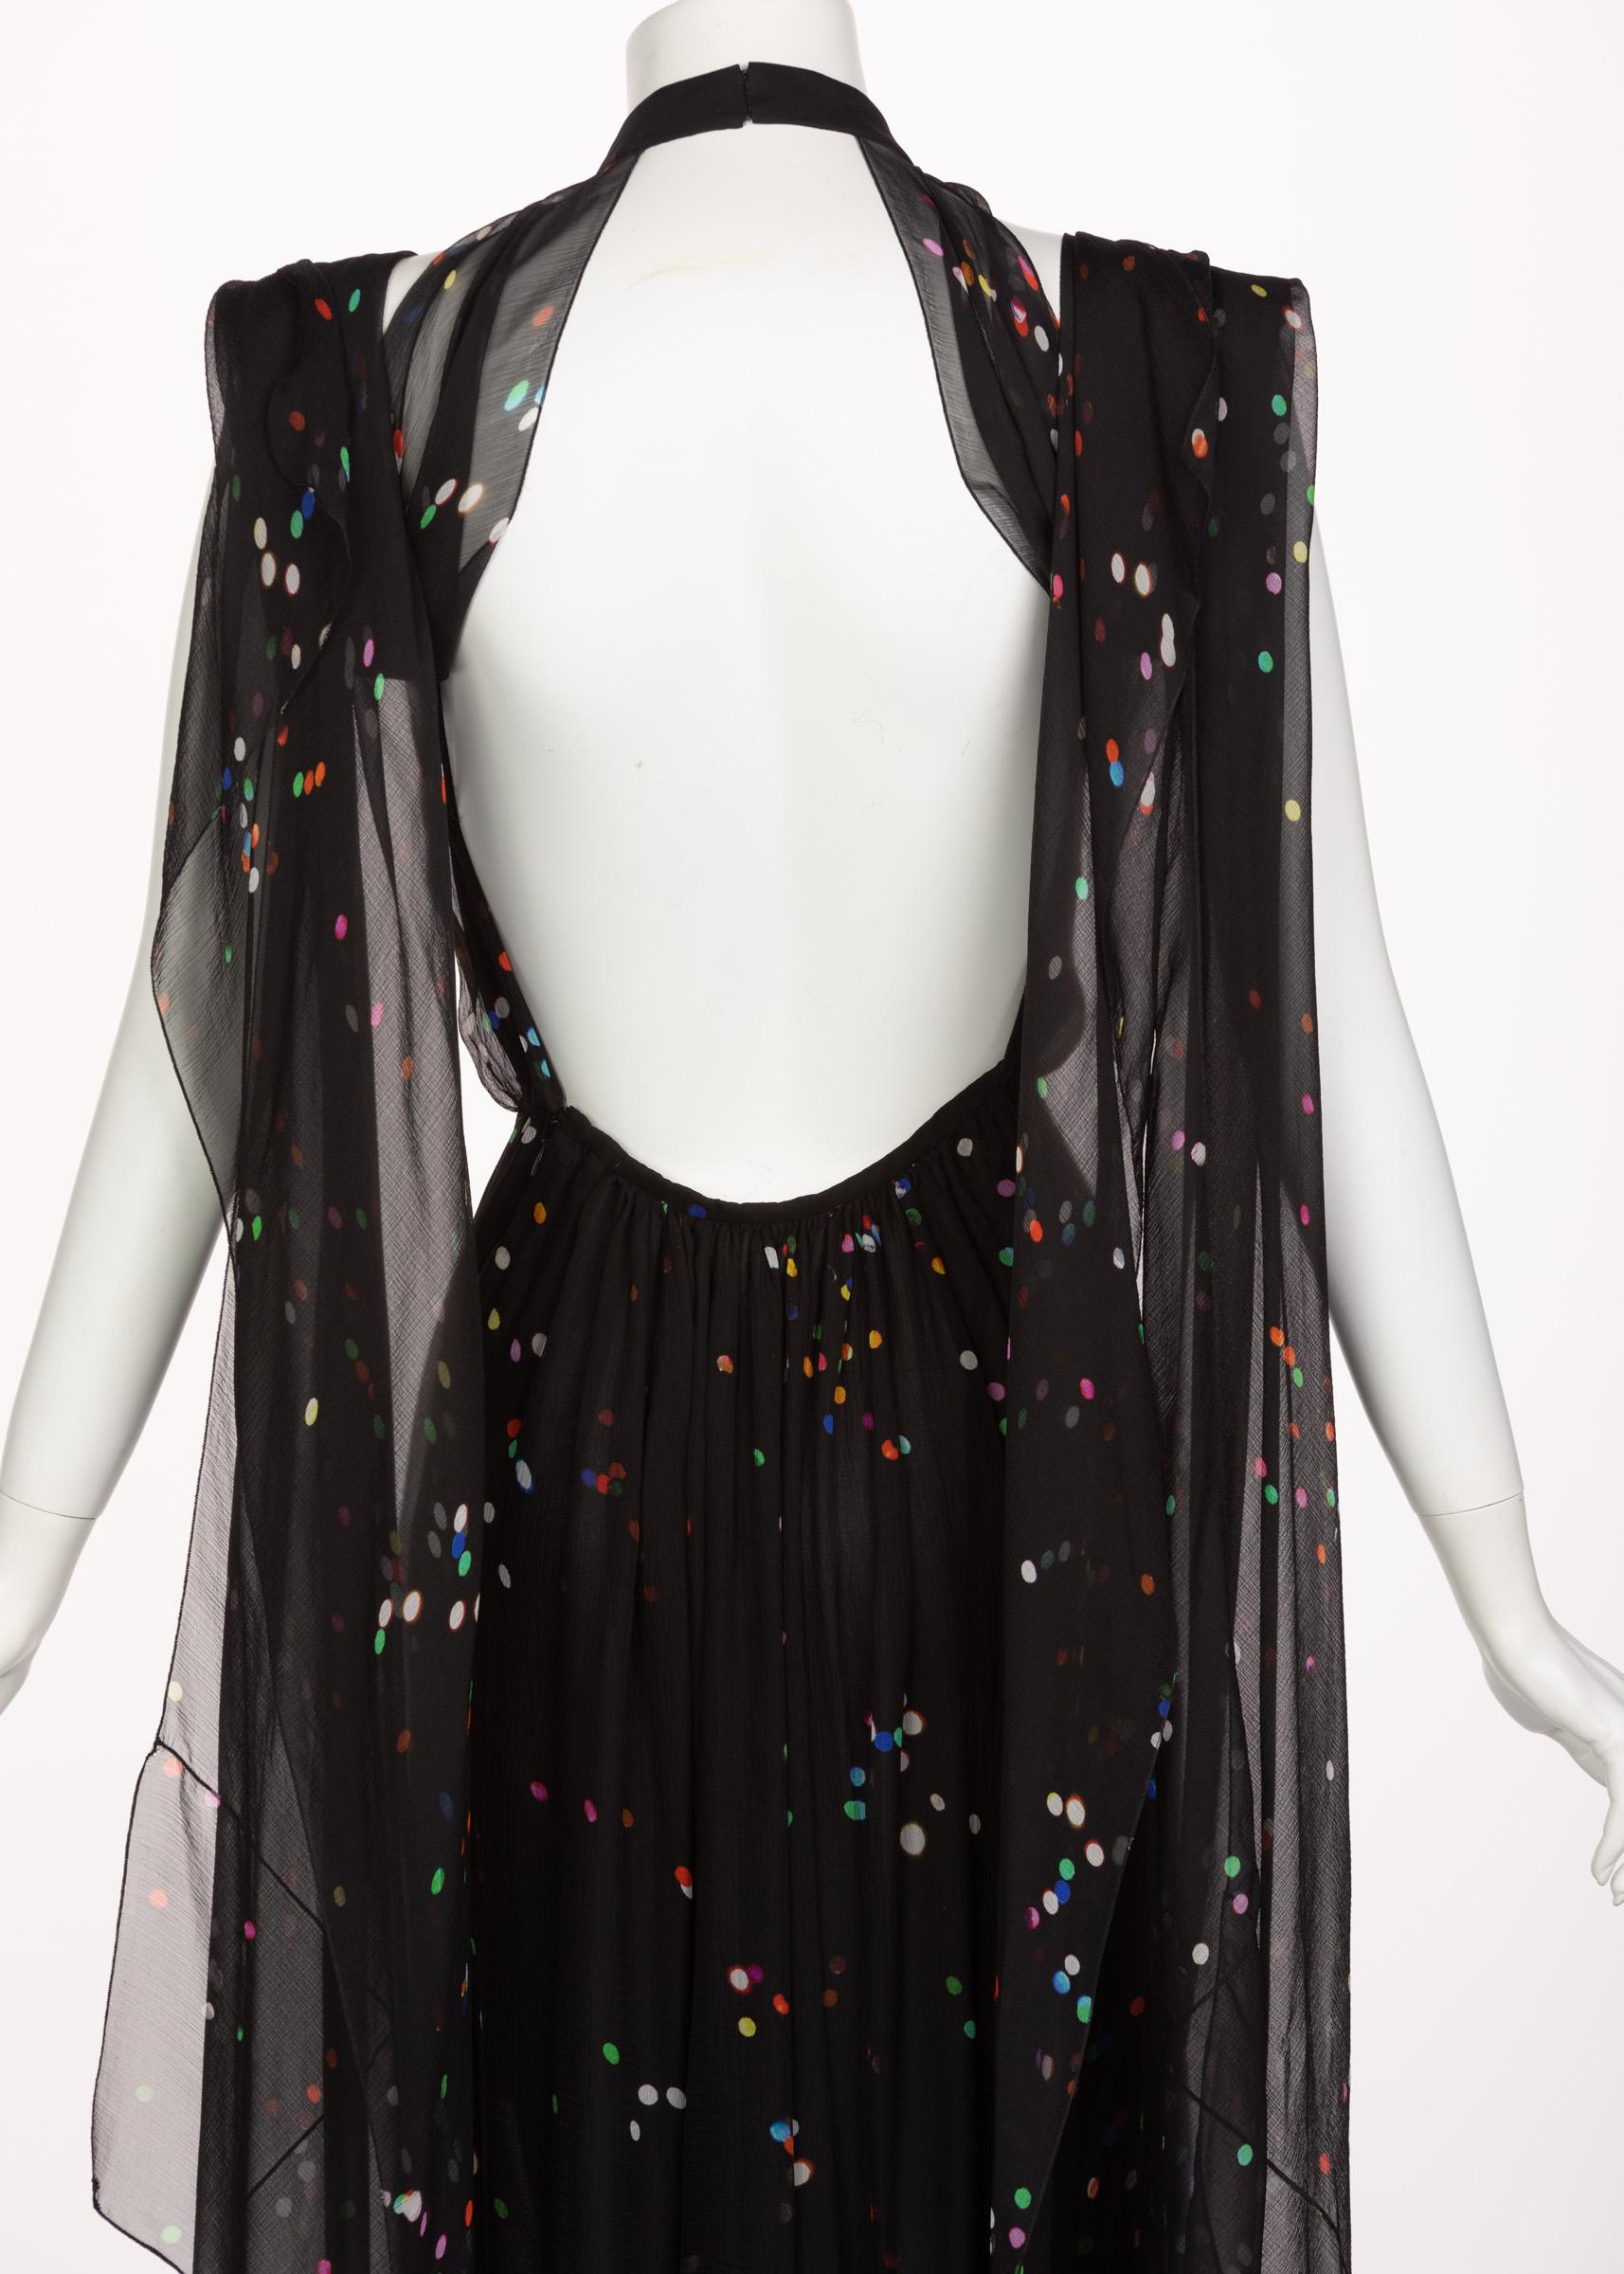 Givenchy Black Confetti Print Silk Cut-Out Back Gown, 2014 3